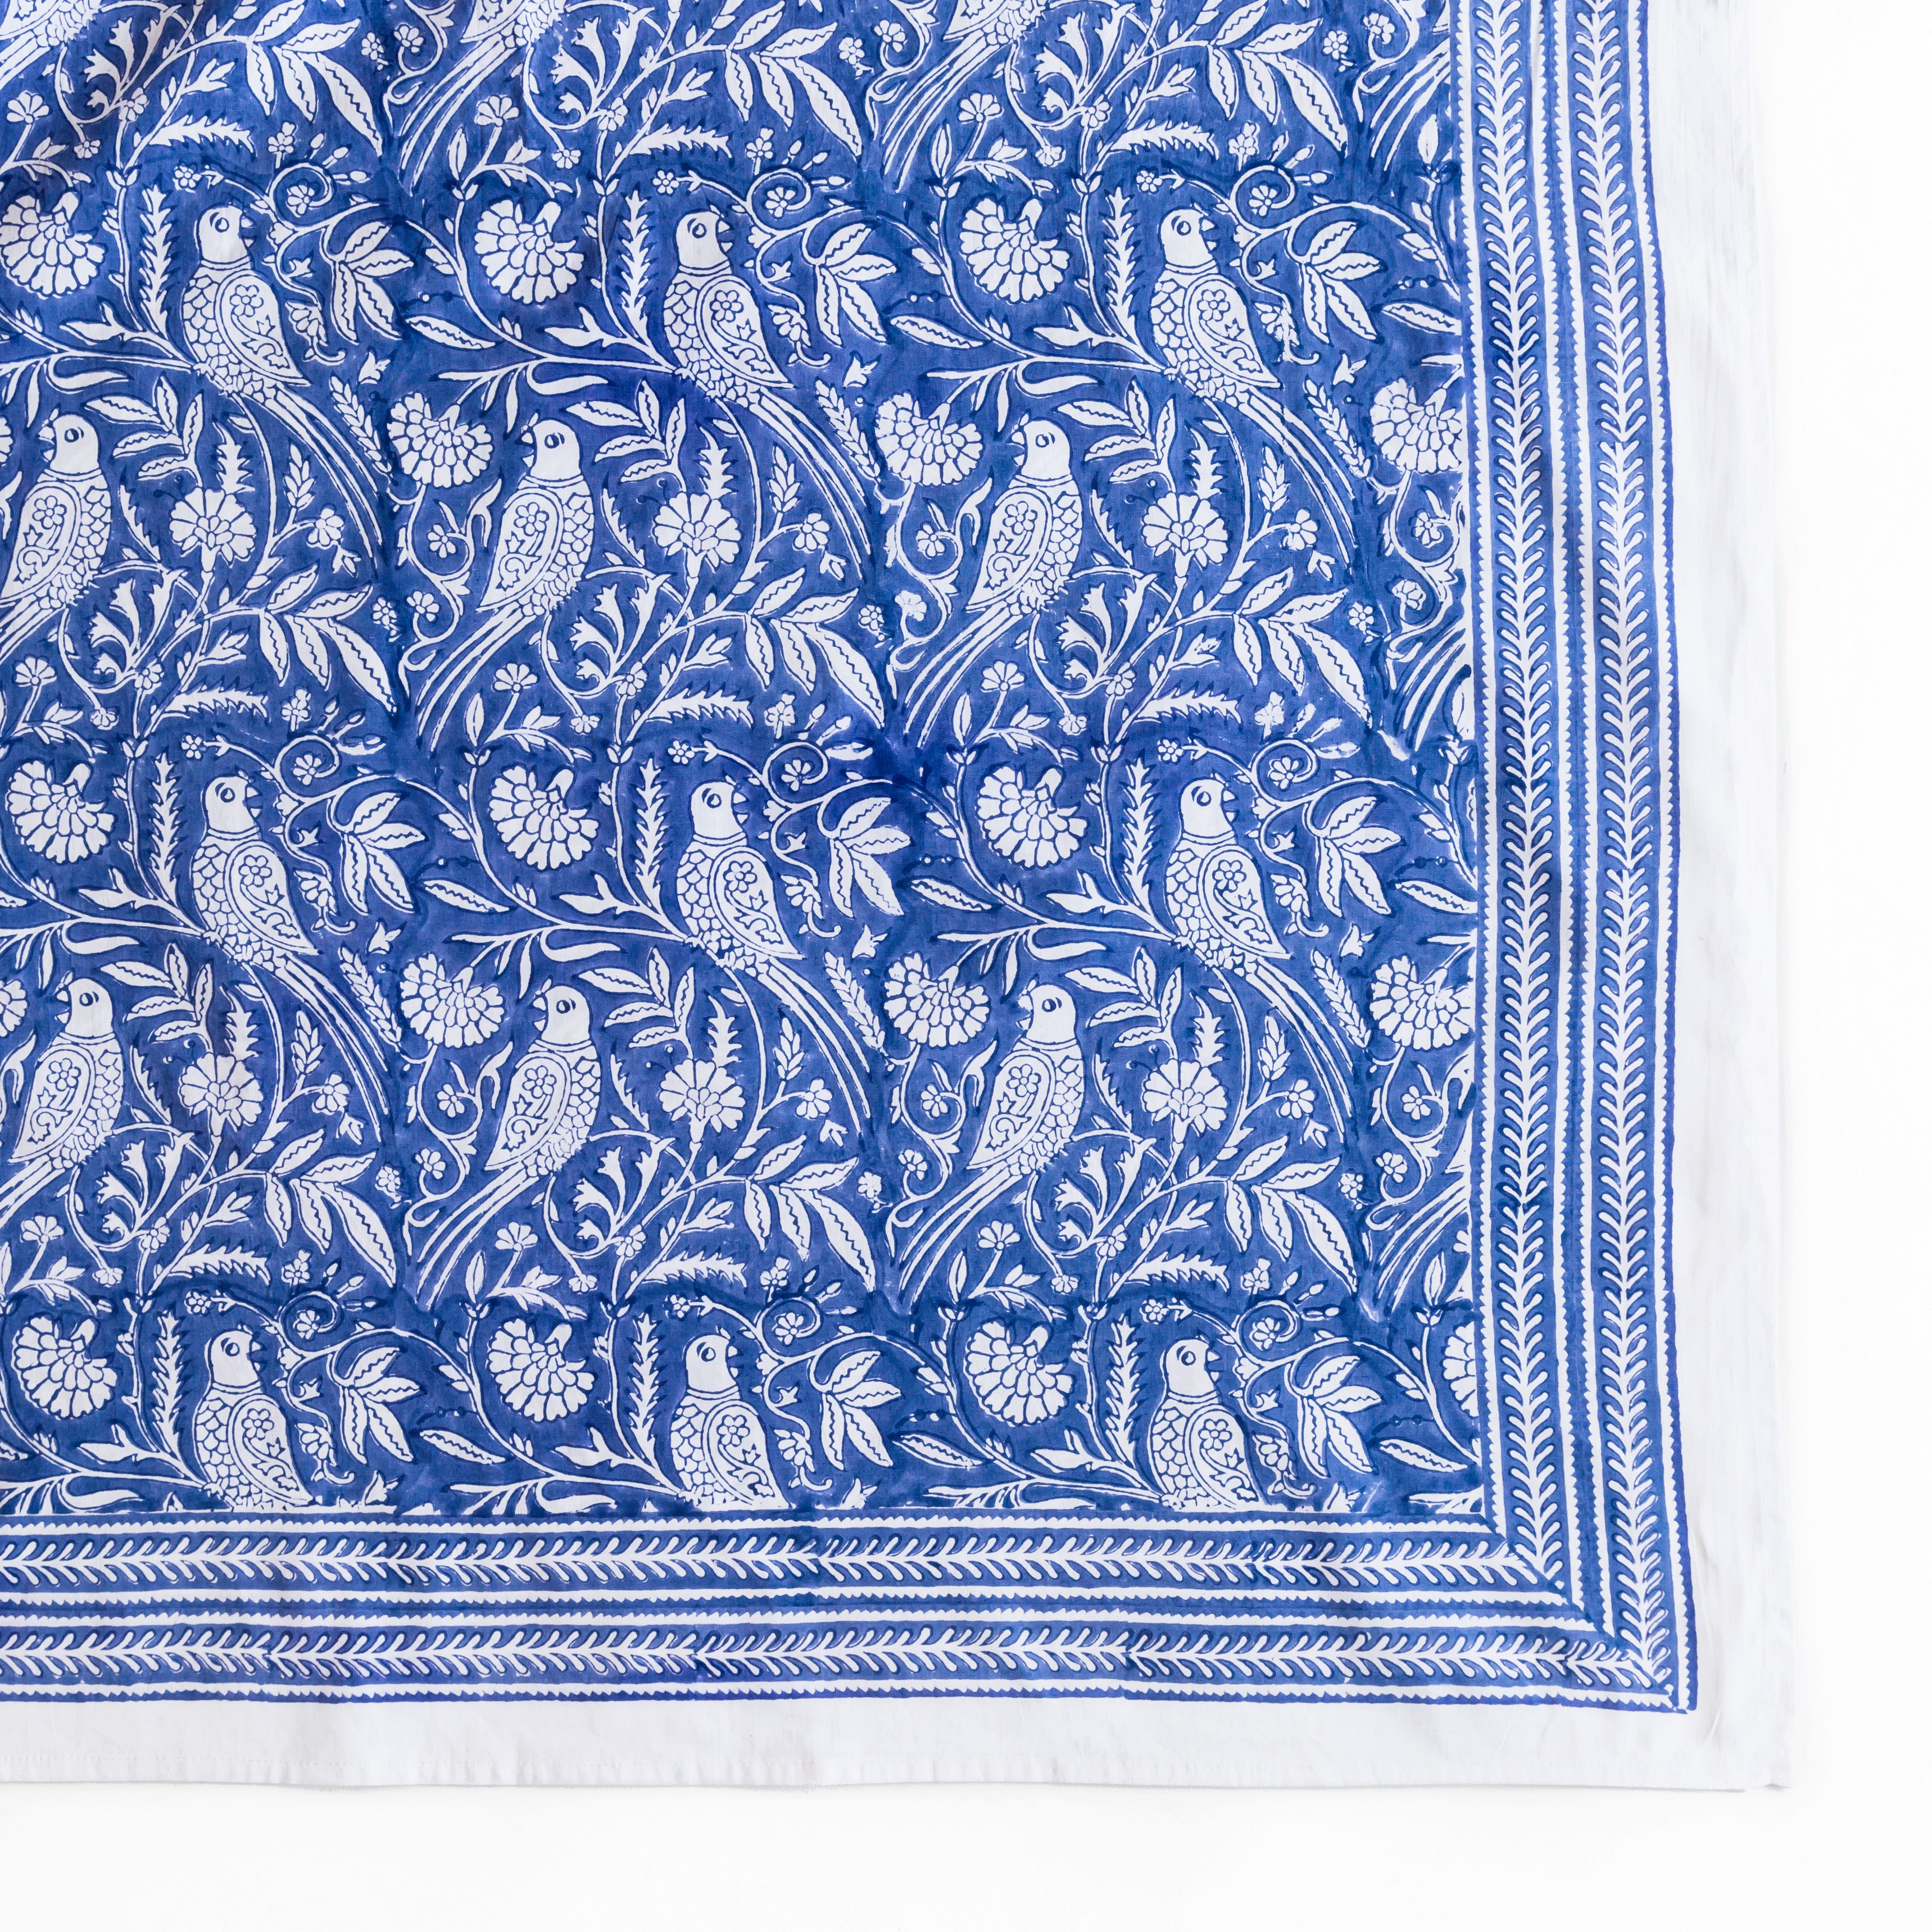 PARROT TABLECLOTH IN BLUE